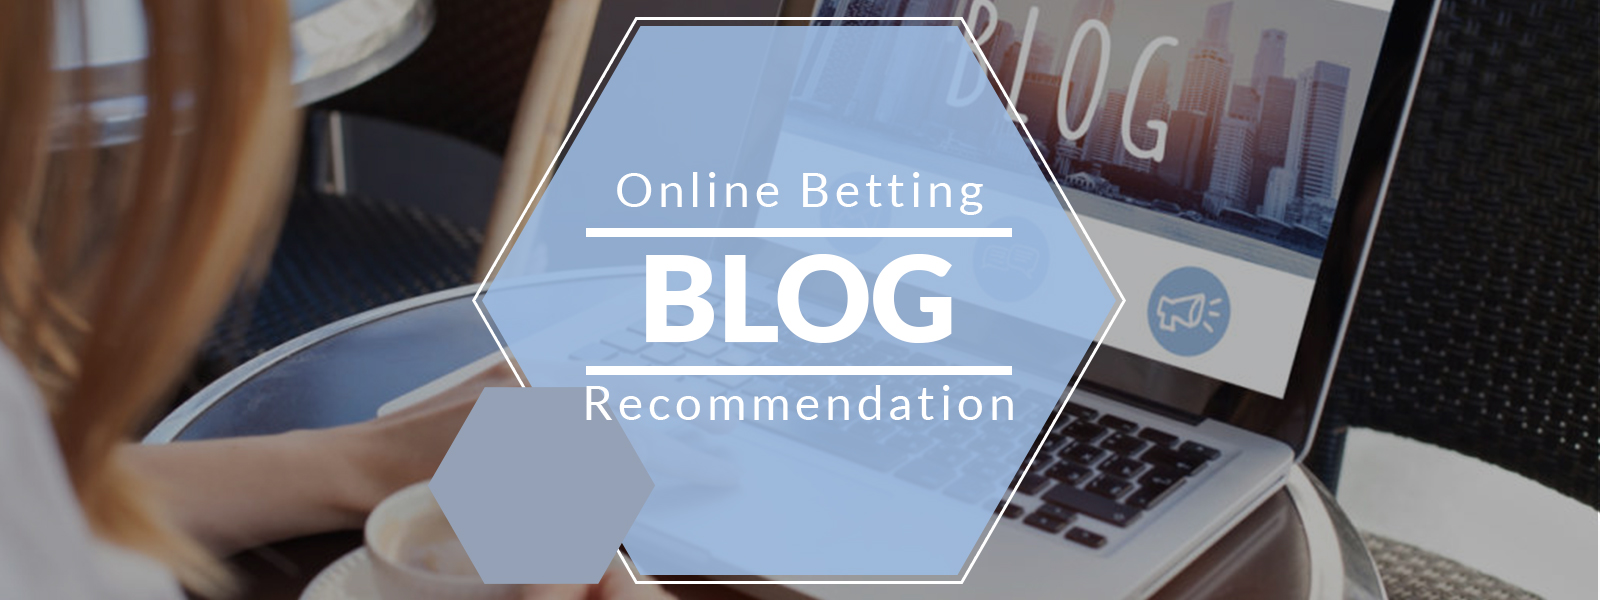 SoccerTipsters Blog | Online Betting Blogs Recommendation